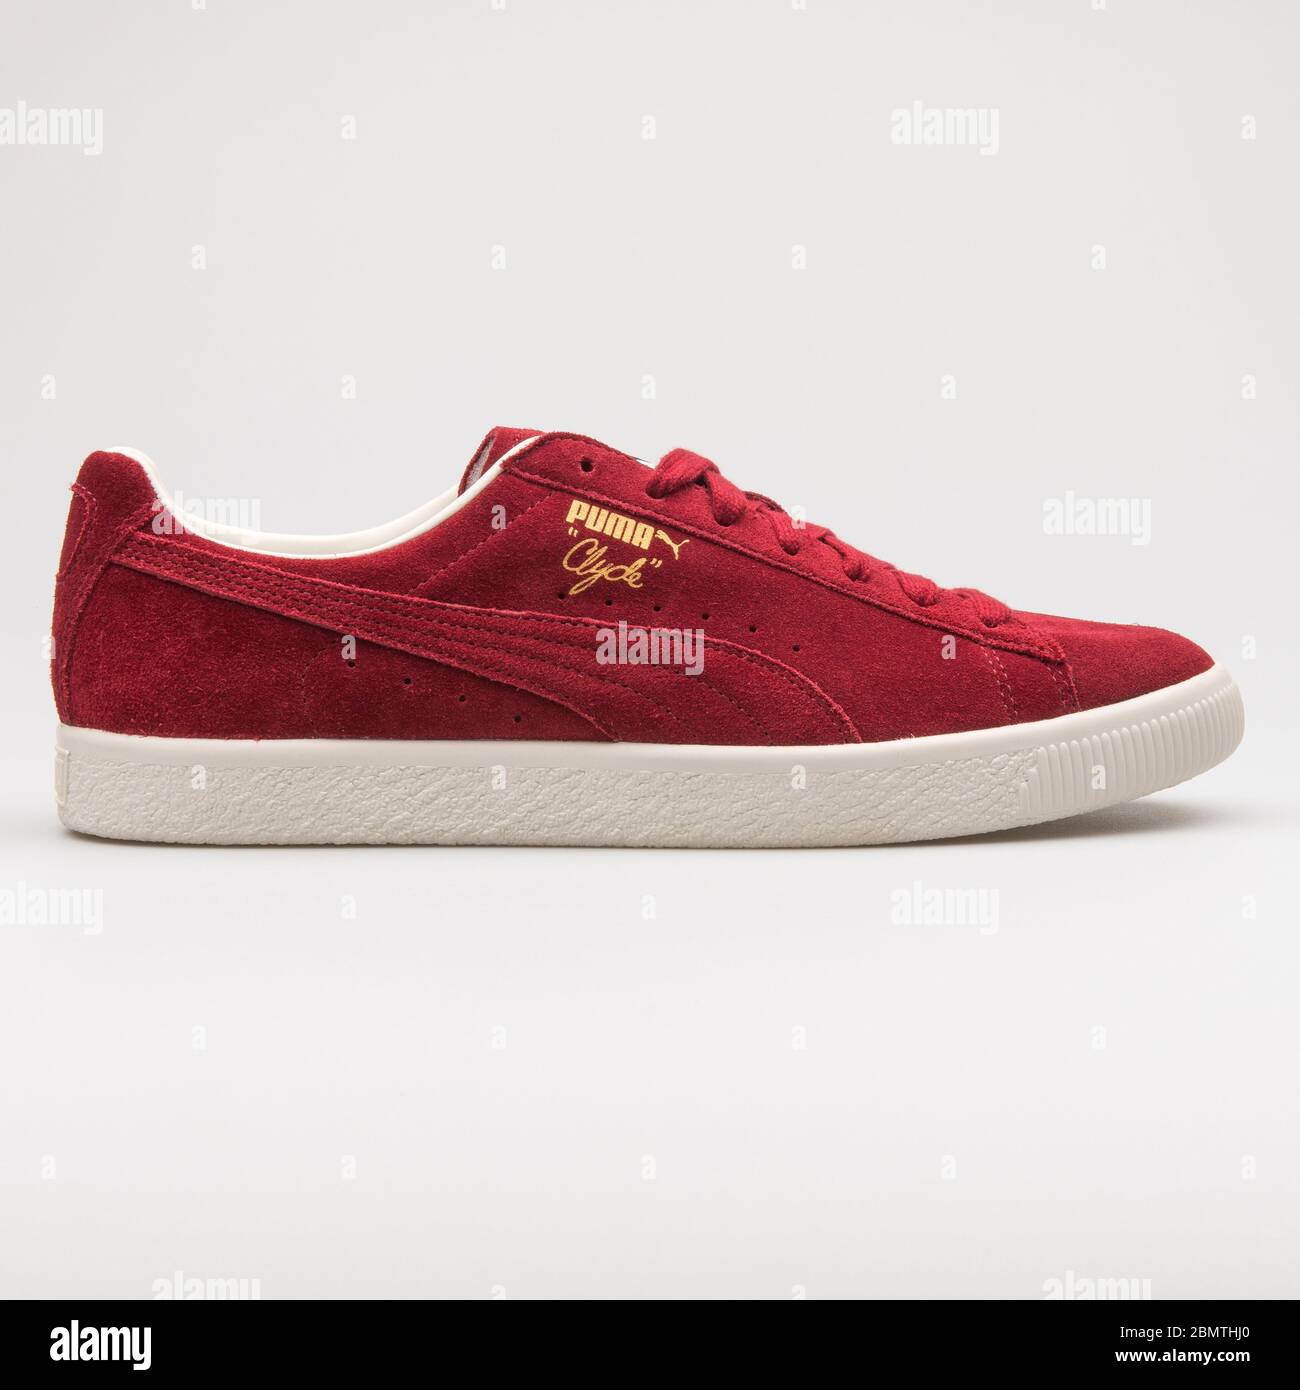 Red Puma Sneakers High Resolution Stock Photography and Images - Alamy